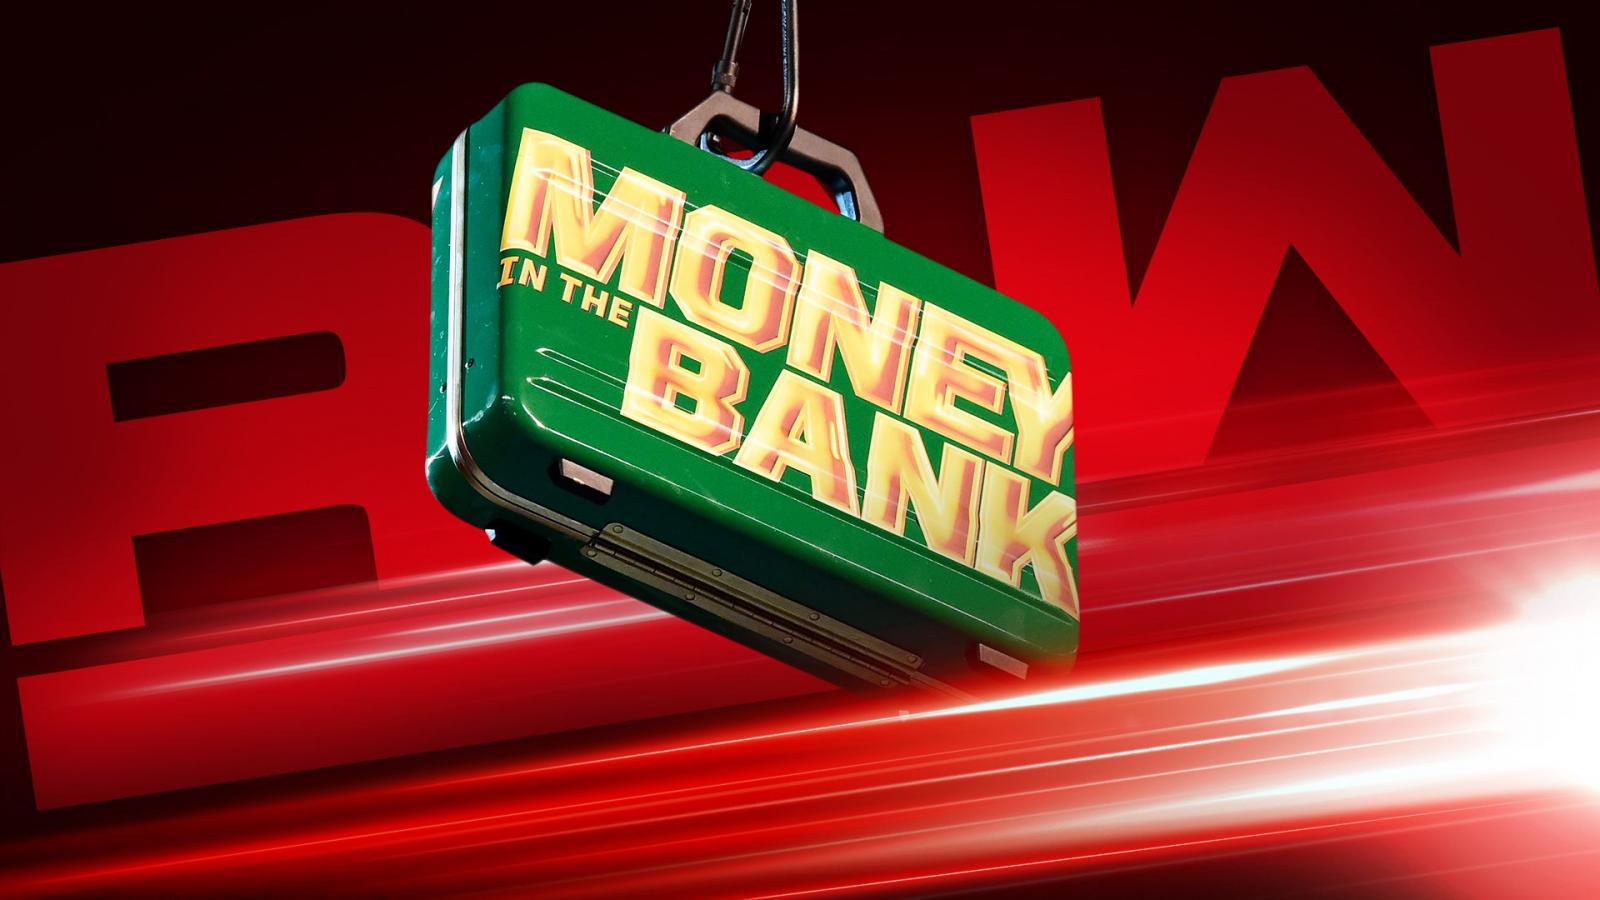 Who else from Raw will qualify for MITB's namesake matches?